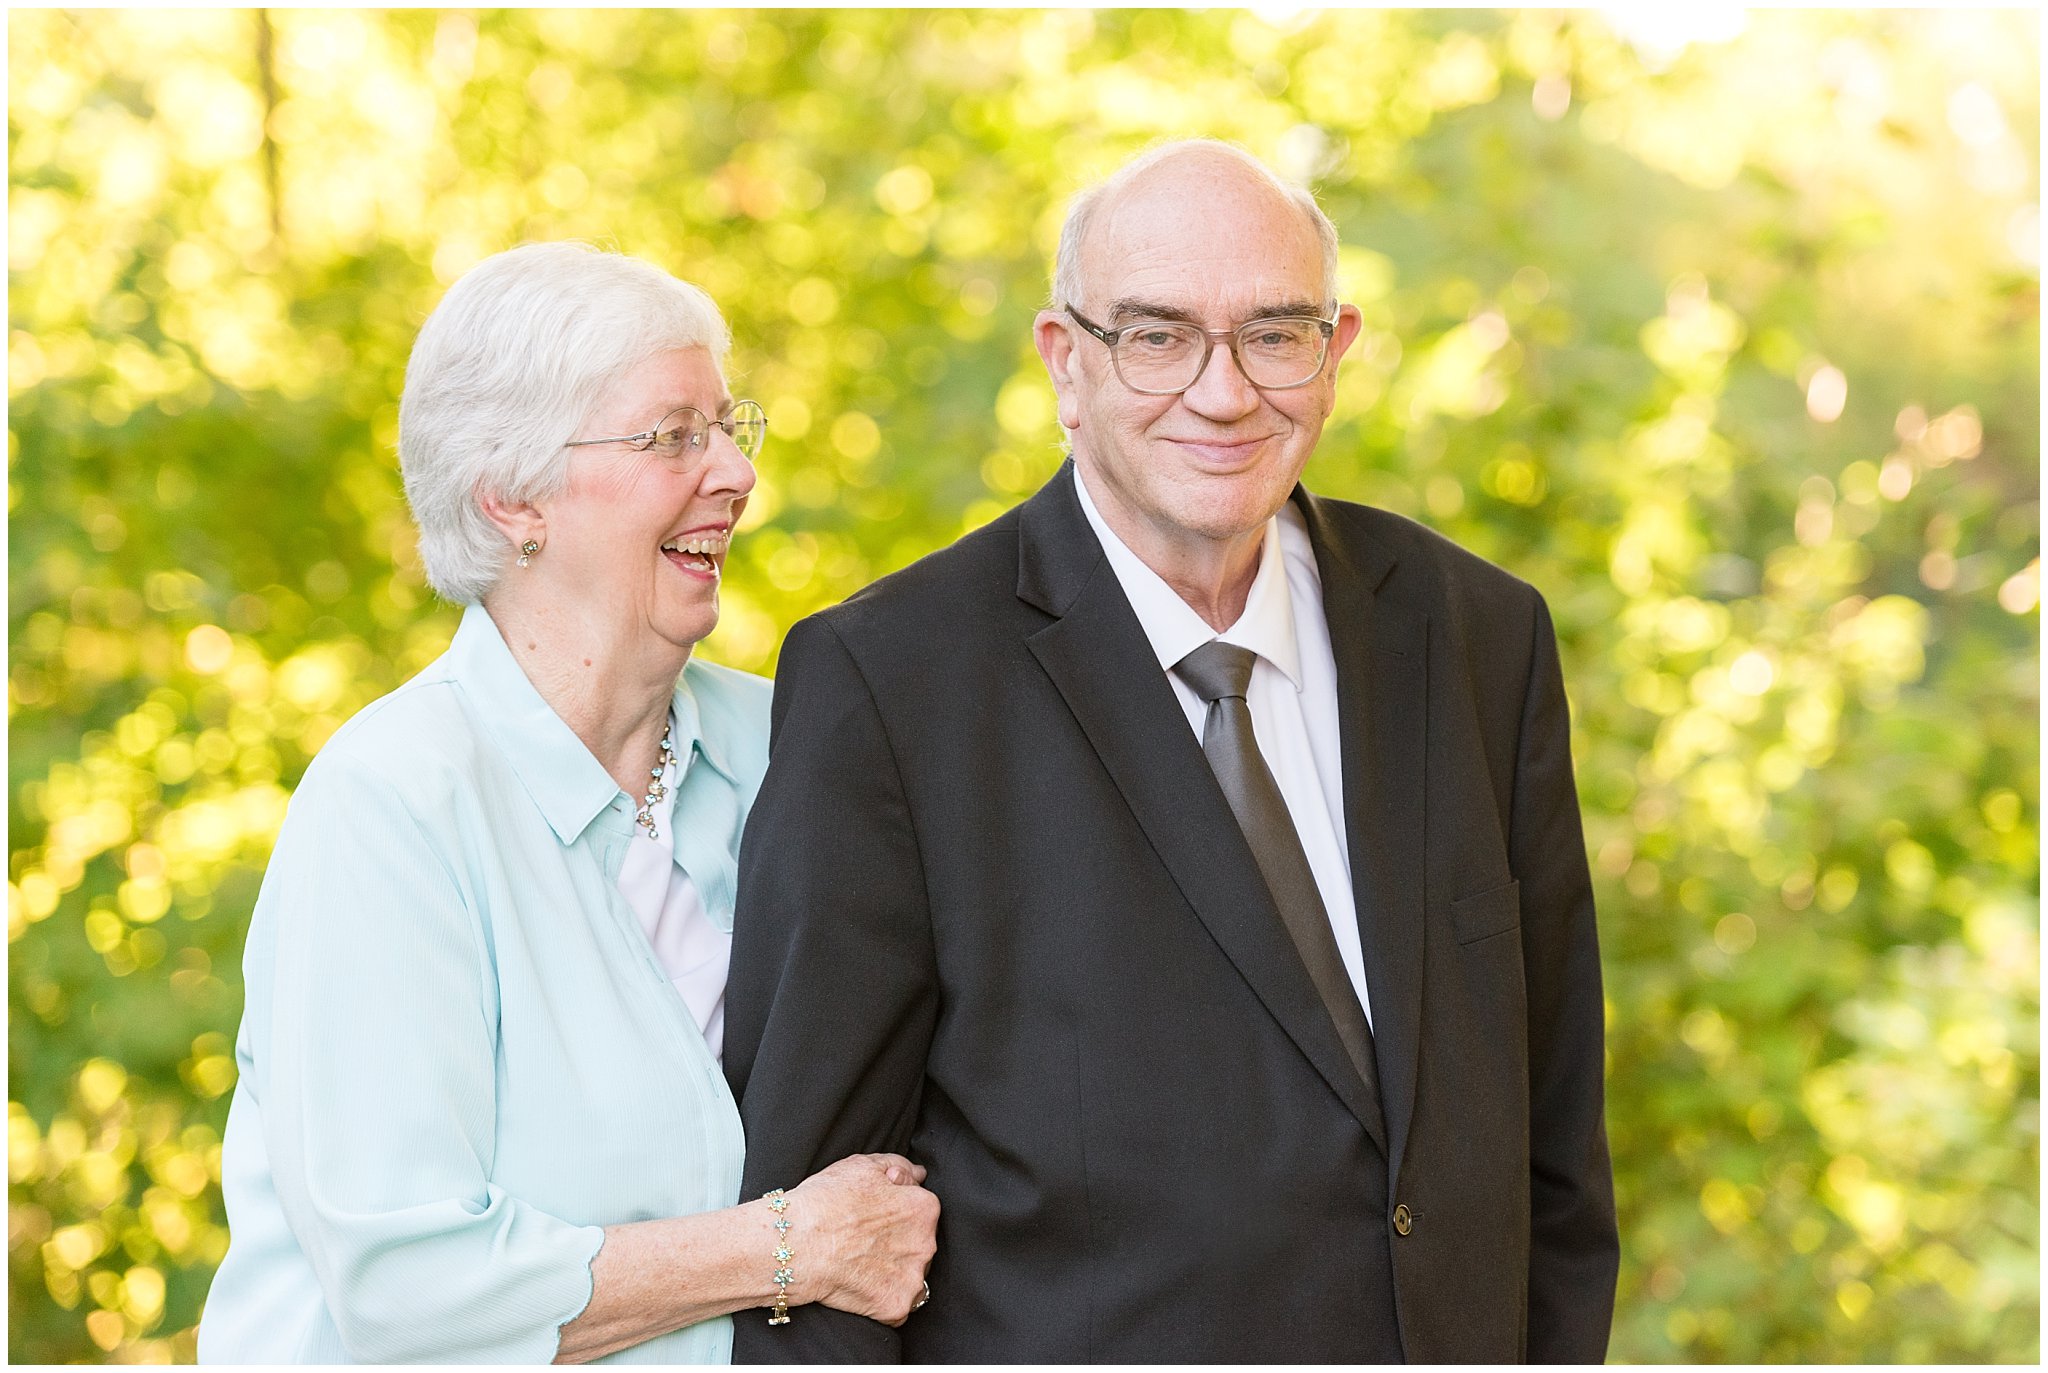 Grandma laughing at Grandpa after a joke | Layton Commons Park | Layton Couples Photographer | Jessie and Dallin